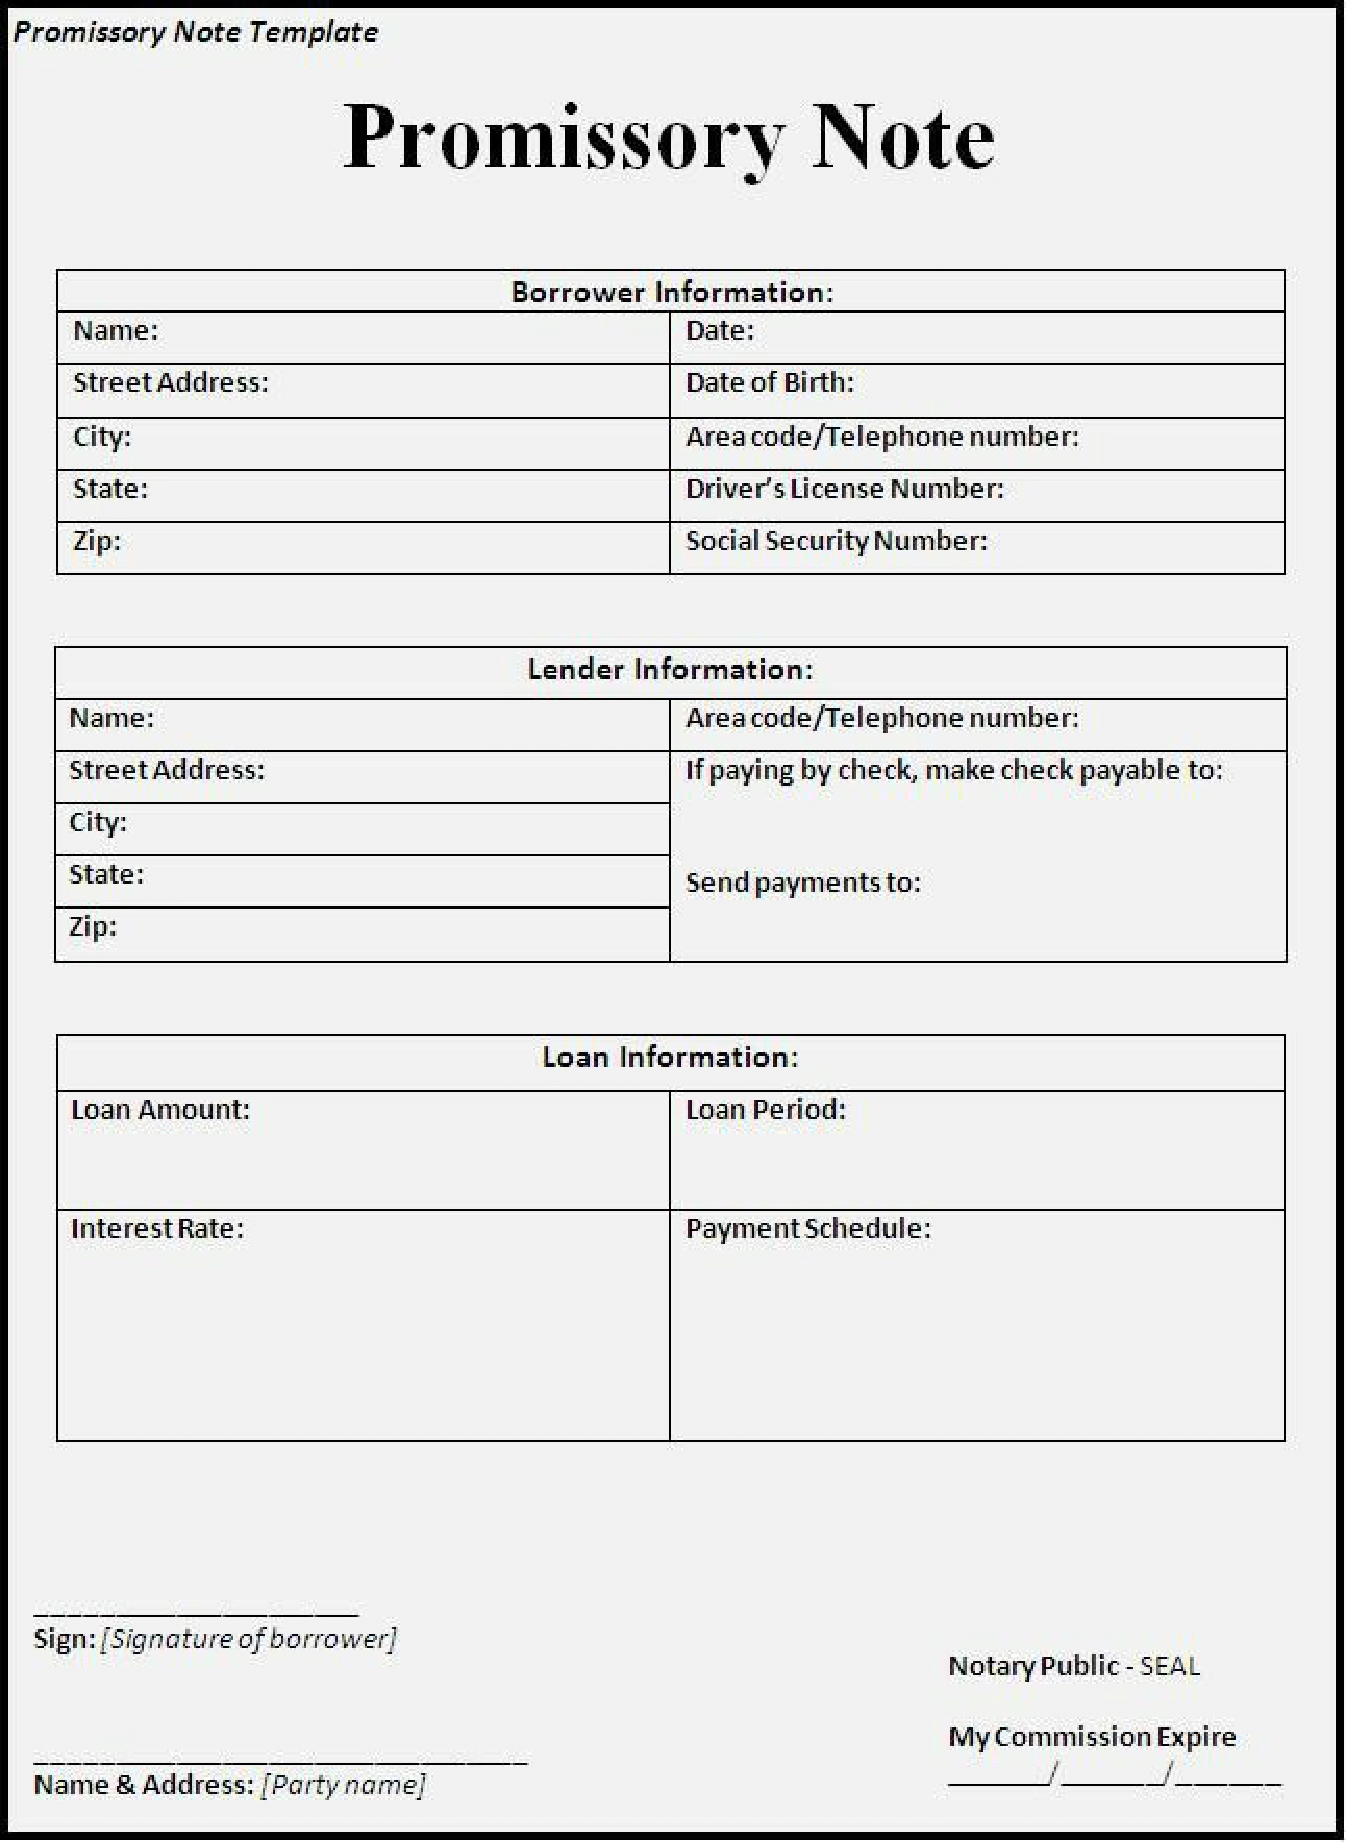 Promissory Note Form – Download FREE Template